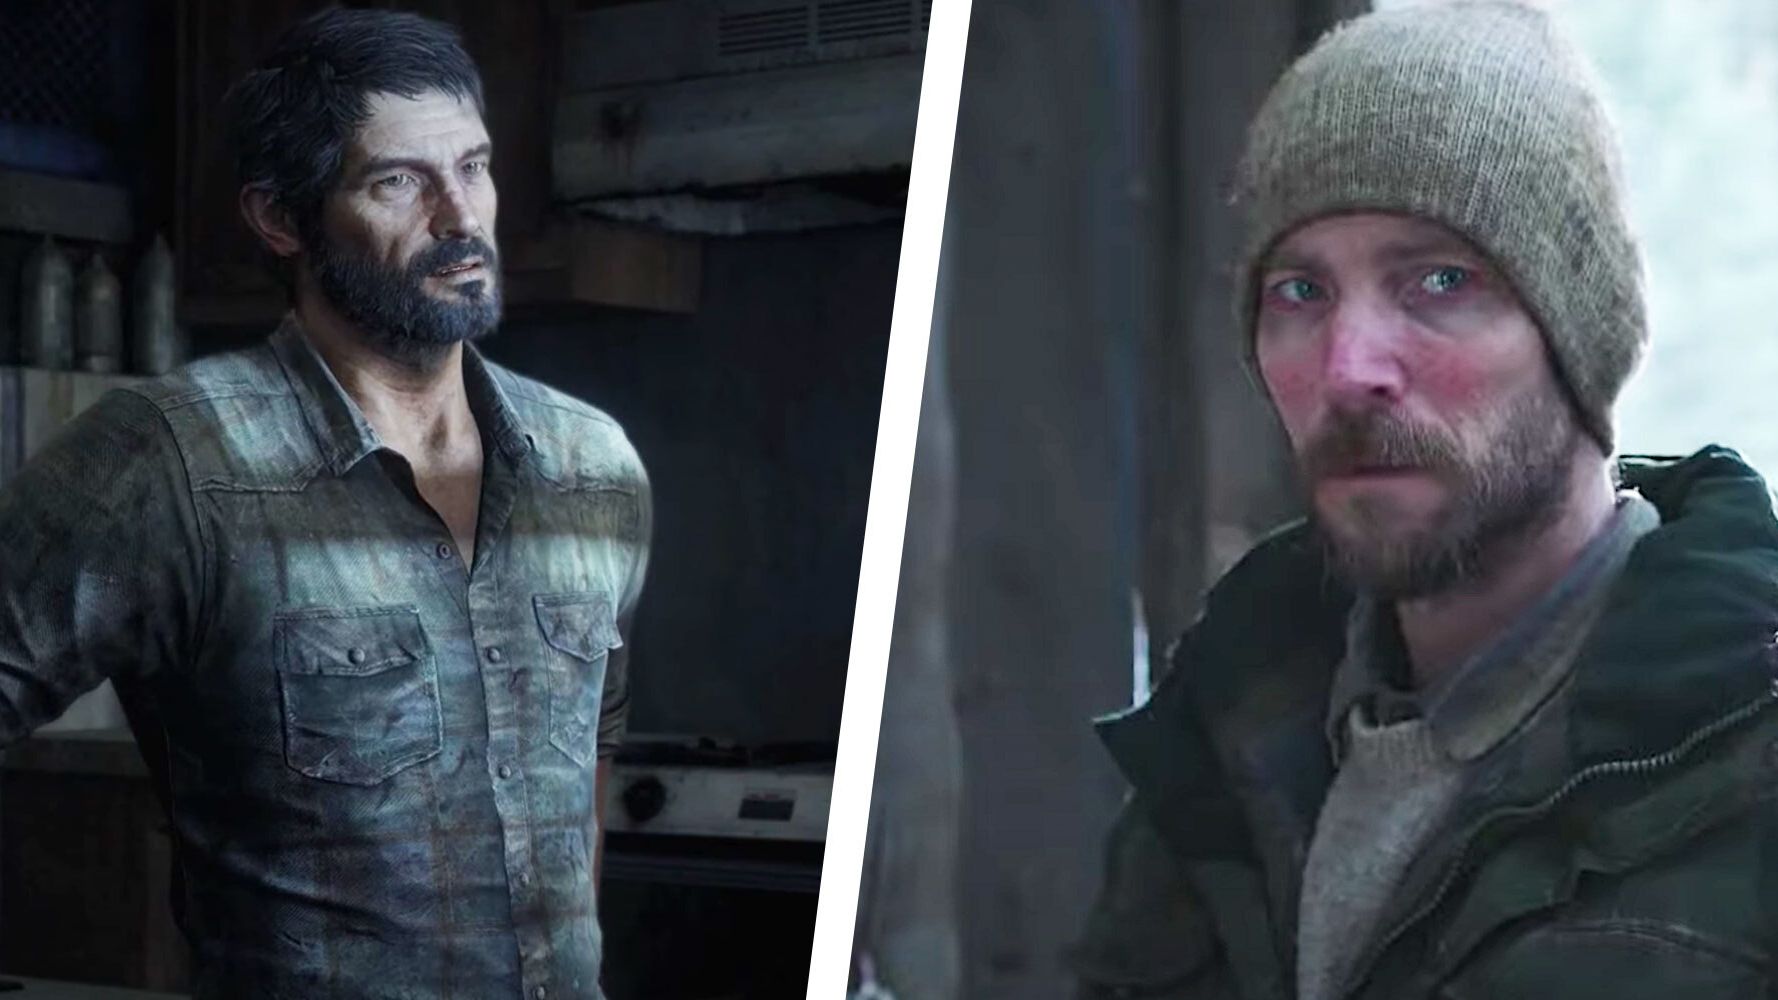 The Last of Us Episode 8: Joel's Voice Actor Troy Baker Cameo